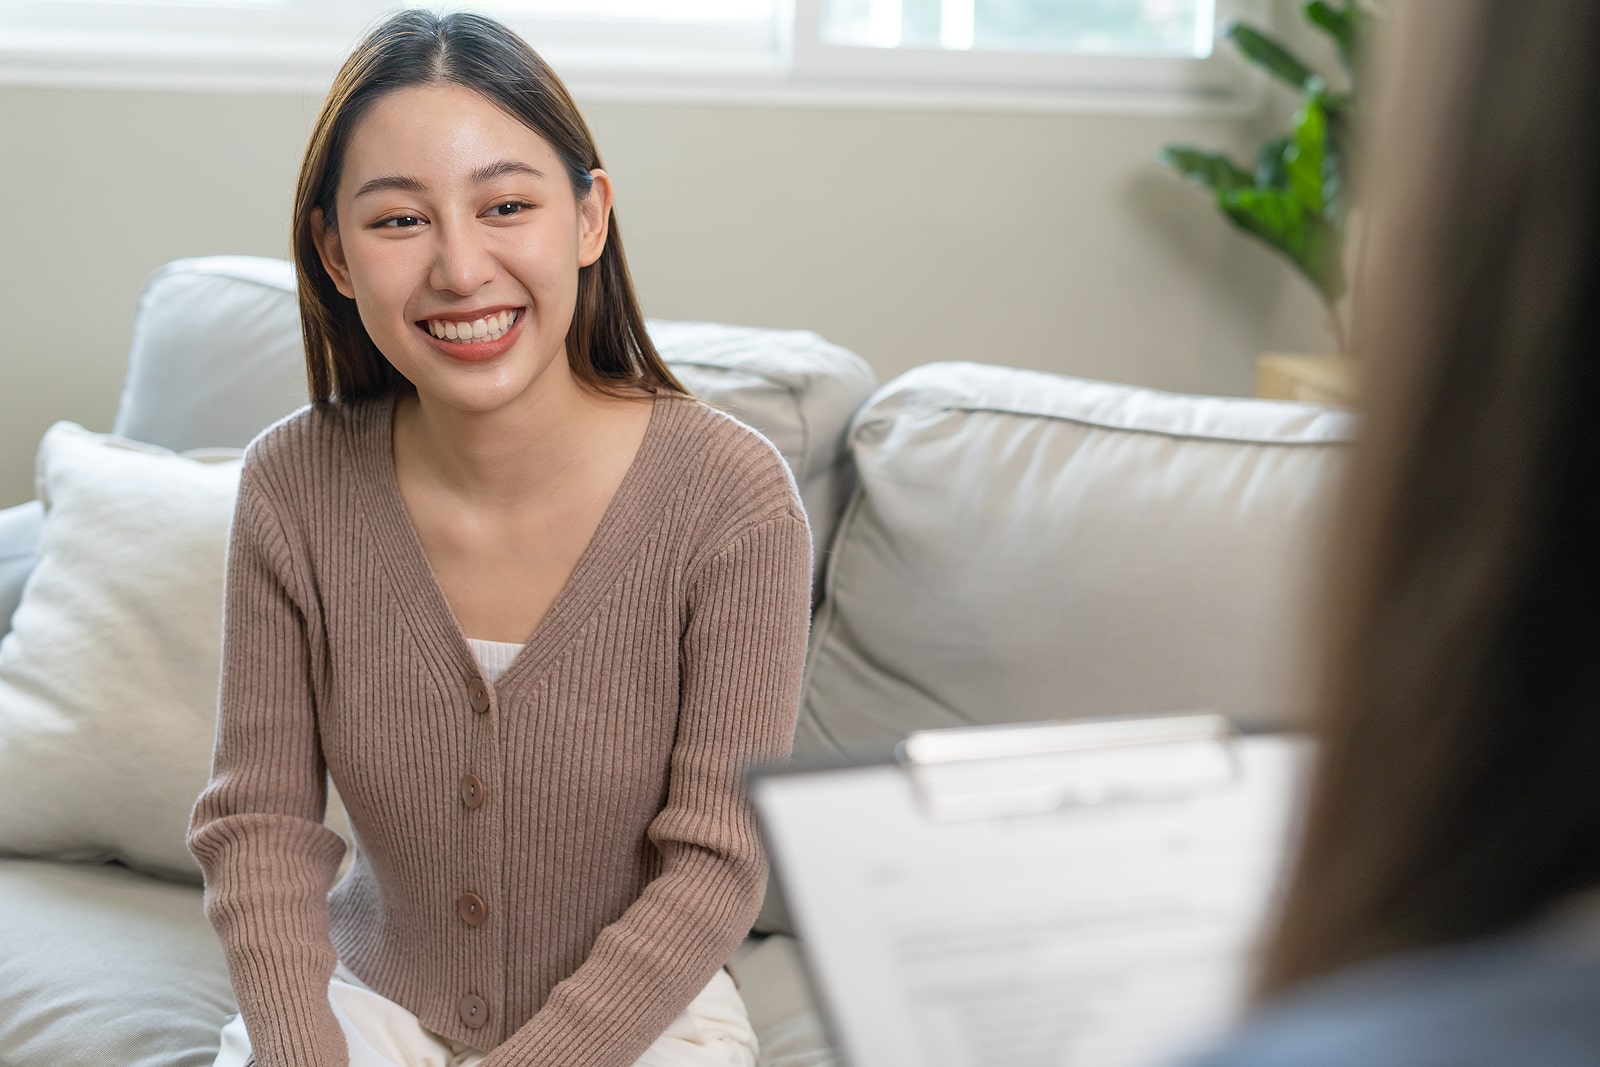 Image of a smiling woman sitting on a couch speaking with a therapist